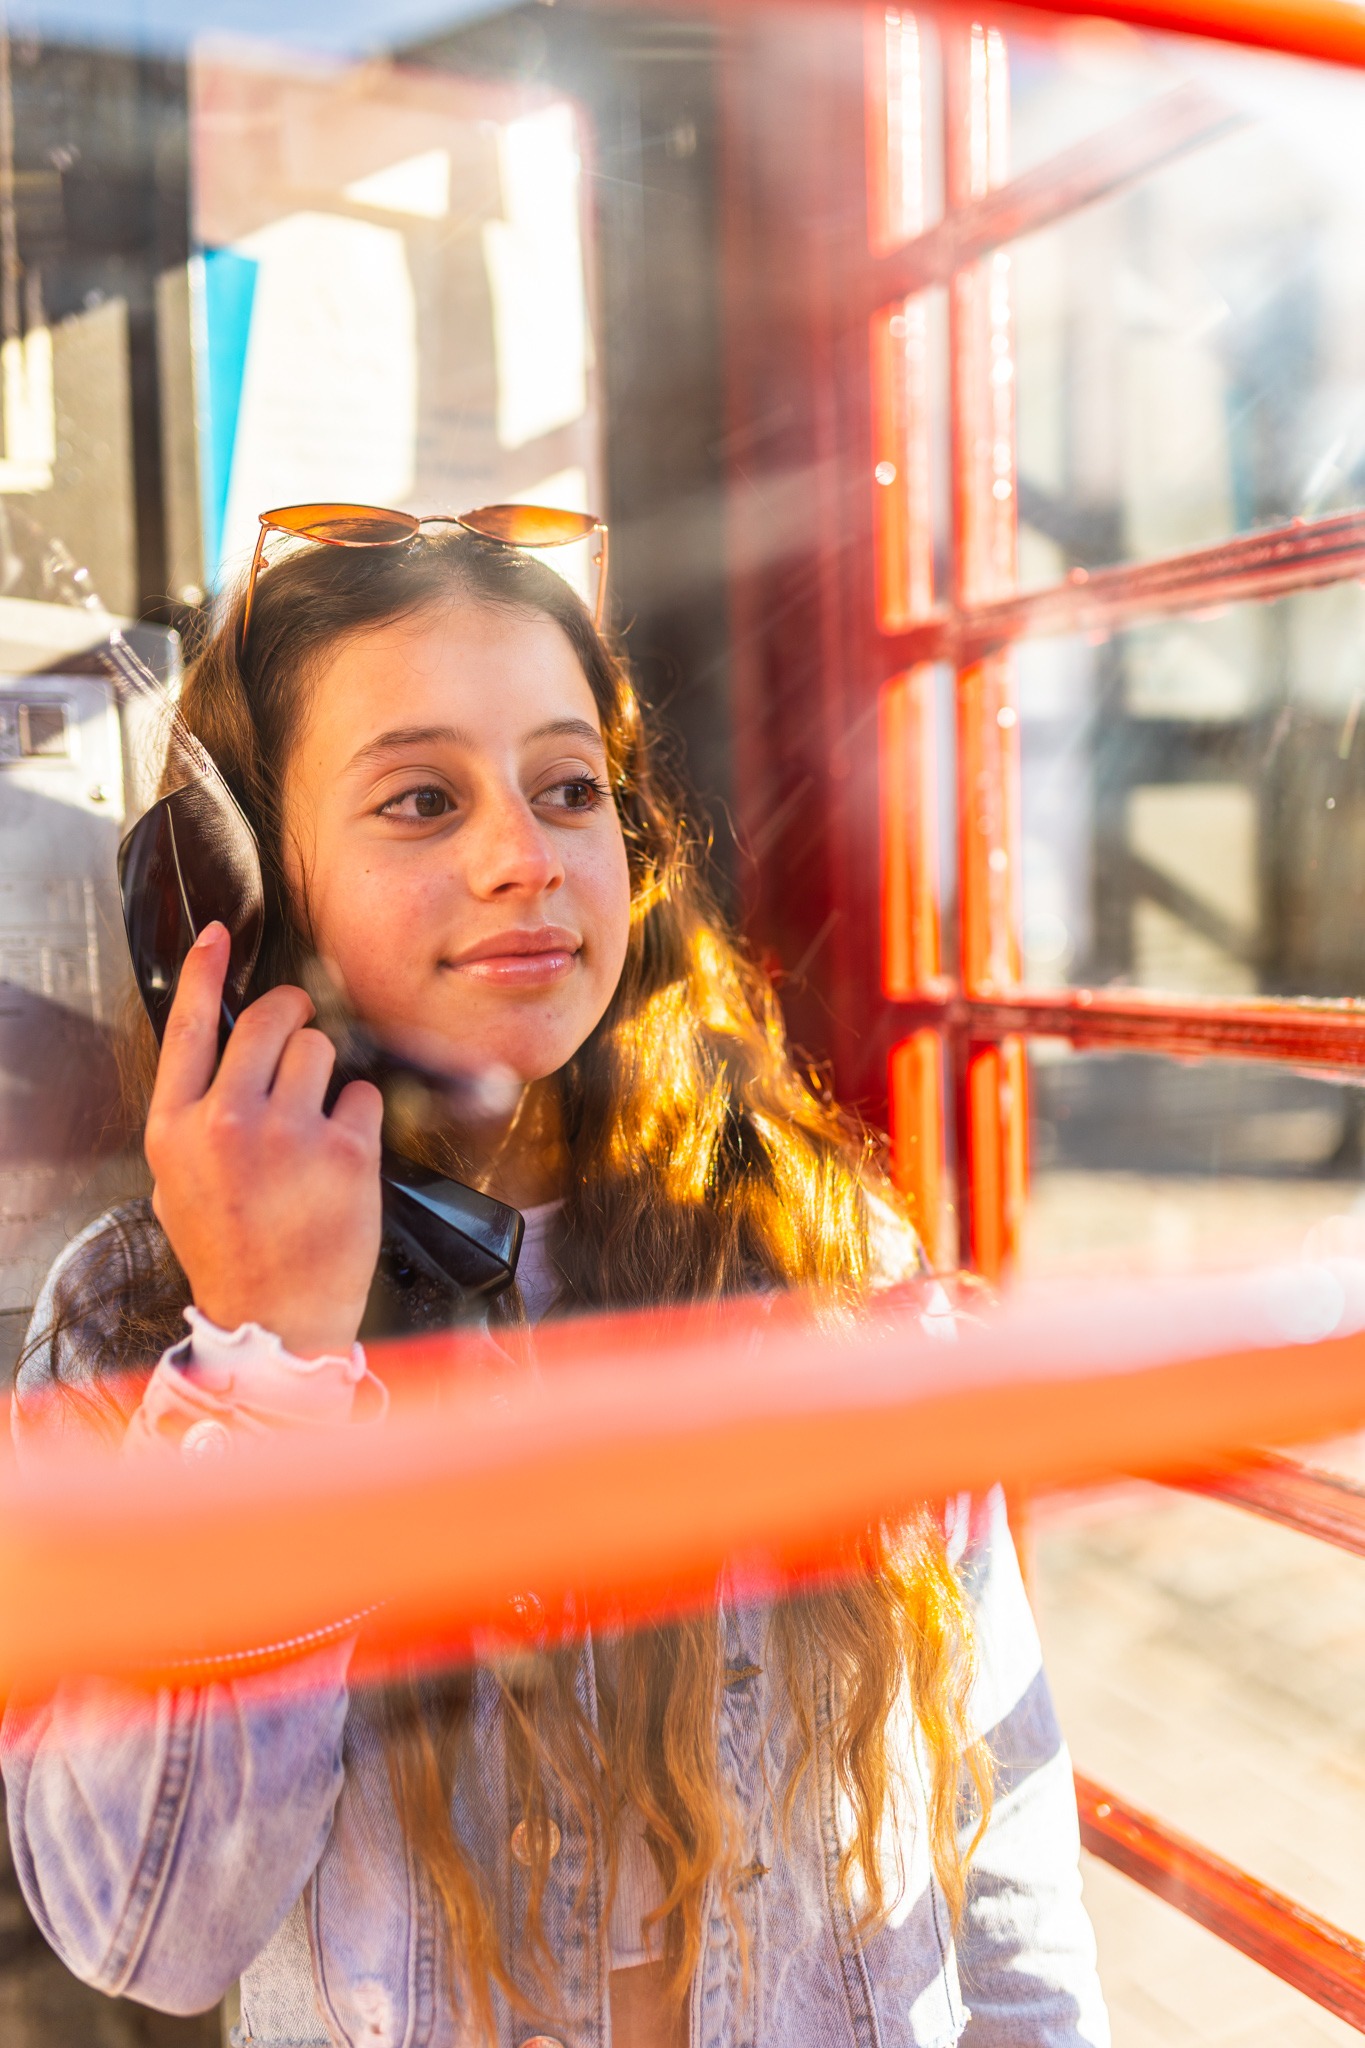 Young girl holding the phone in a red London phone booth